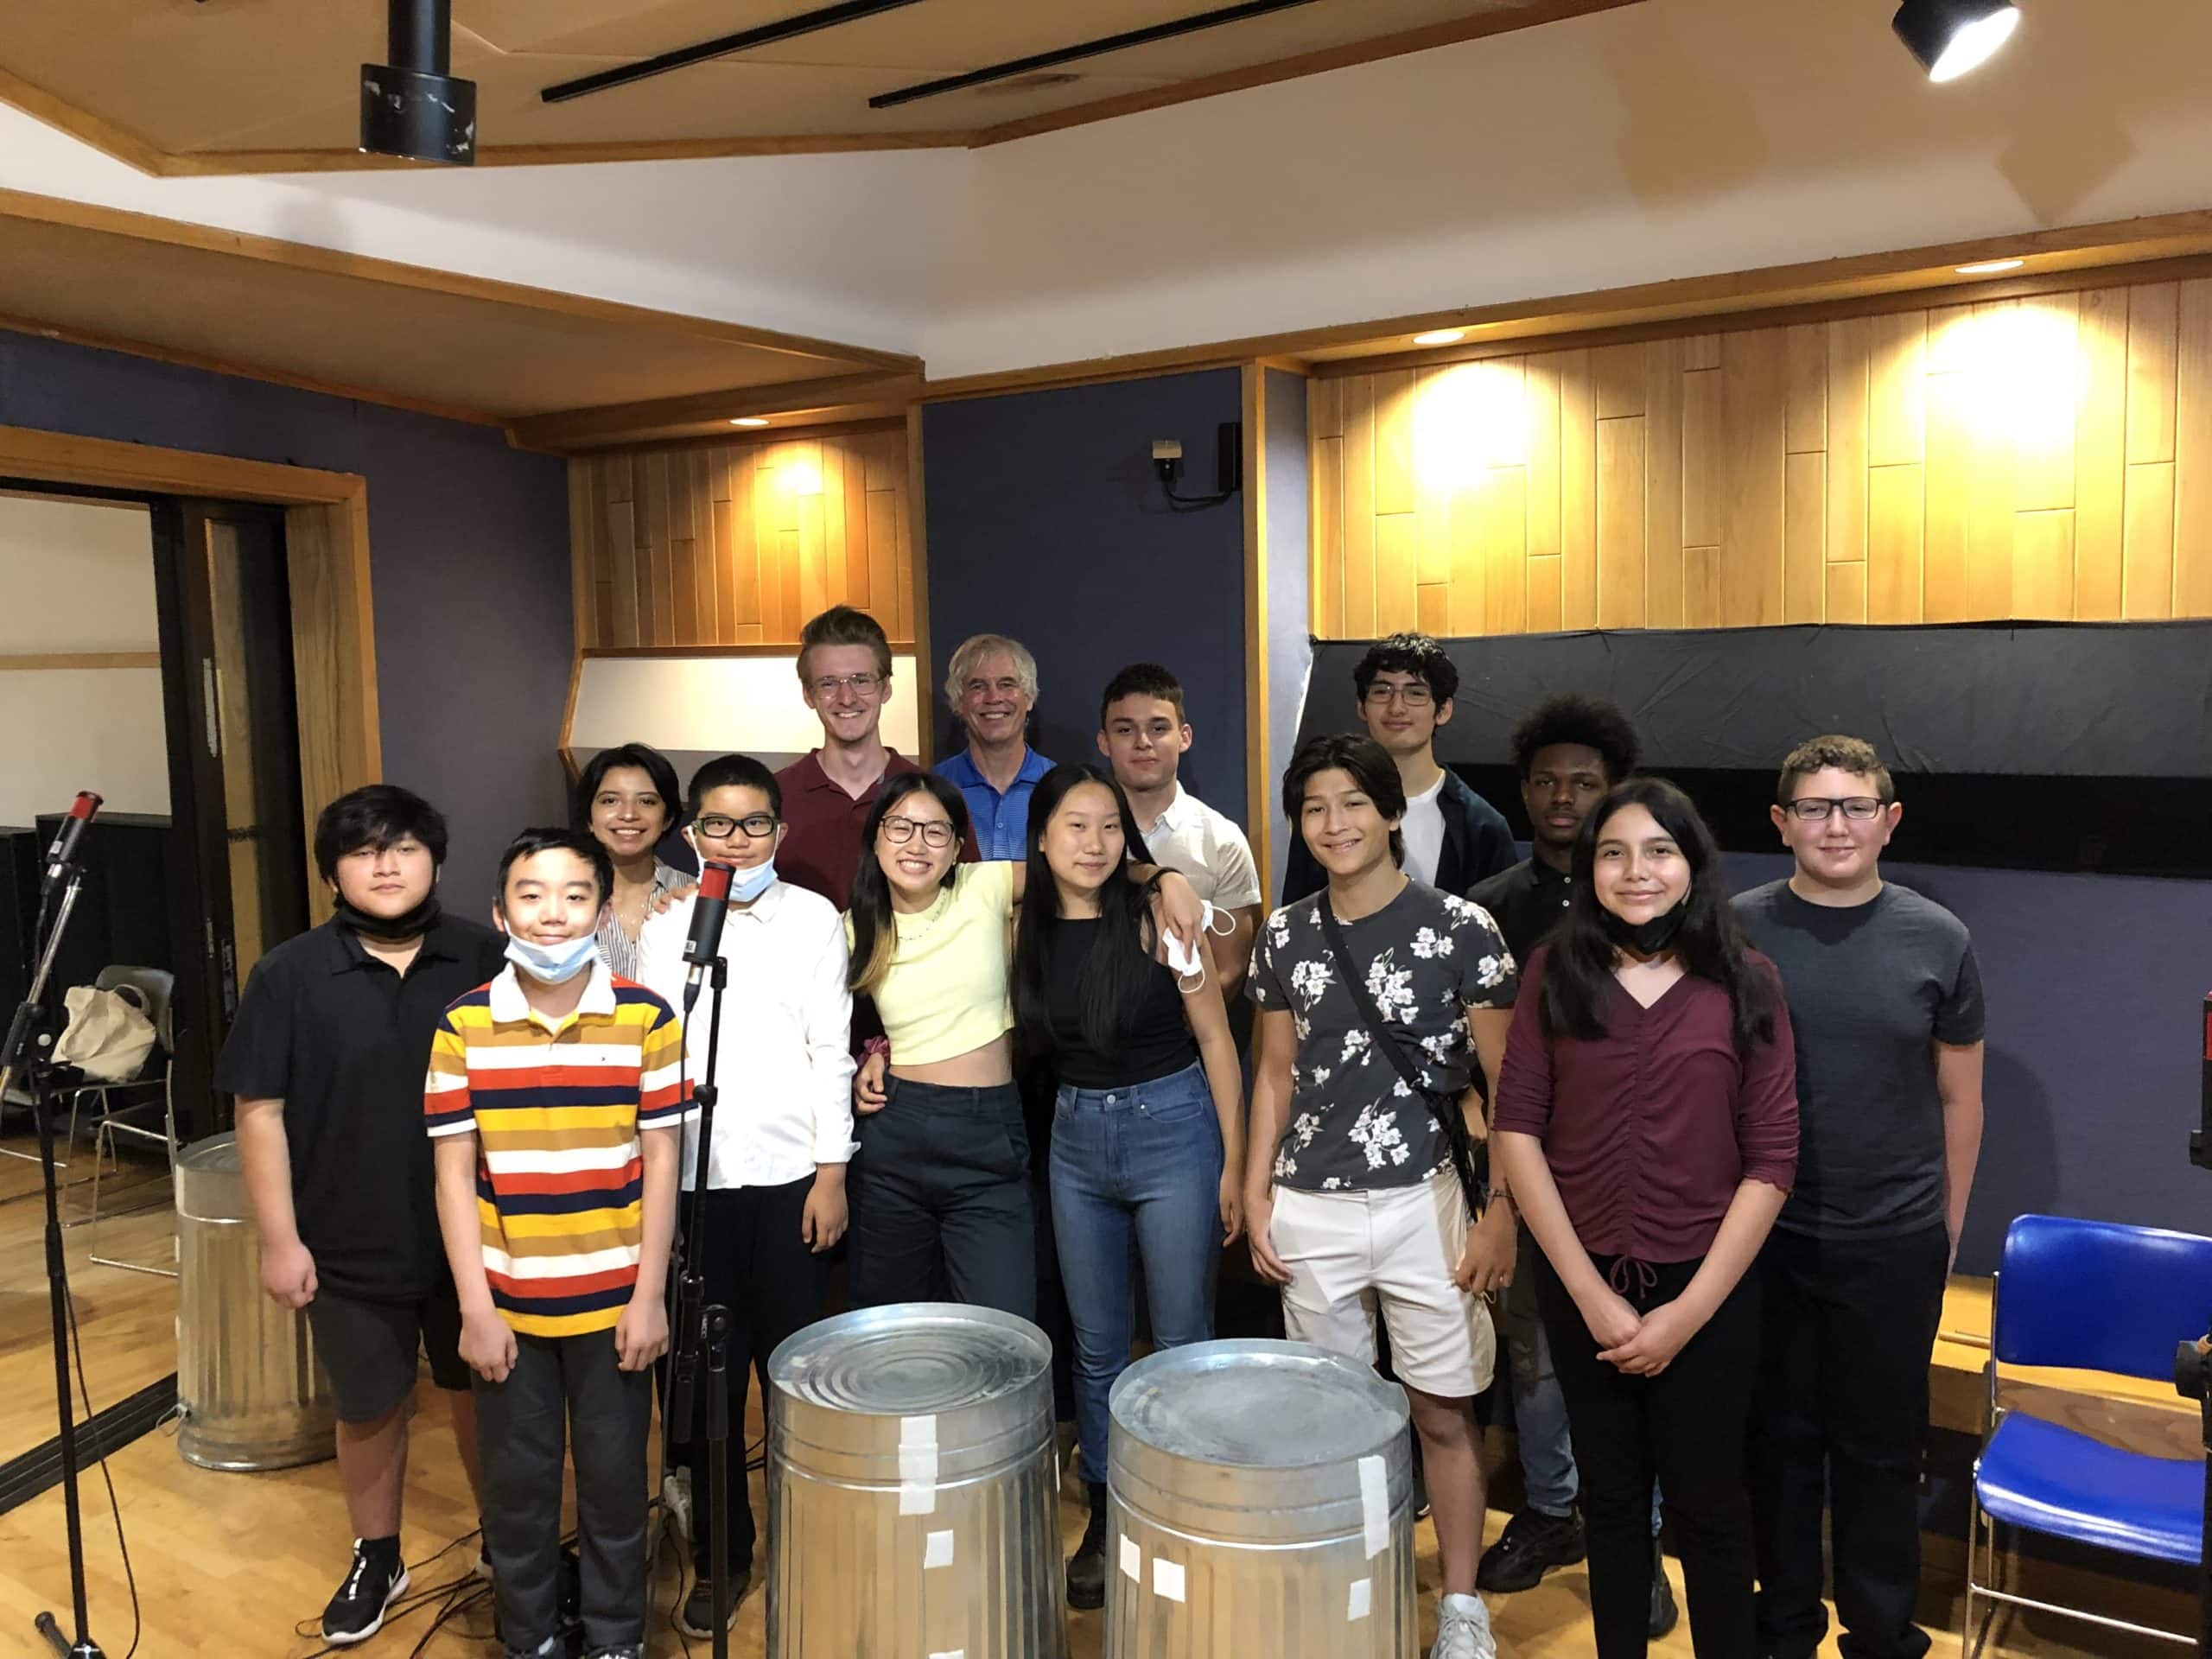 Isabel Armenta’s Experience with the Percussion Scholarship Program